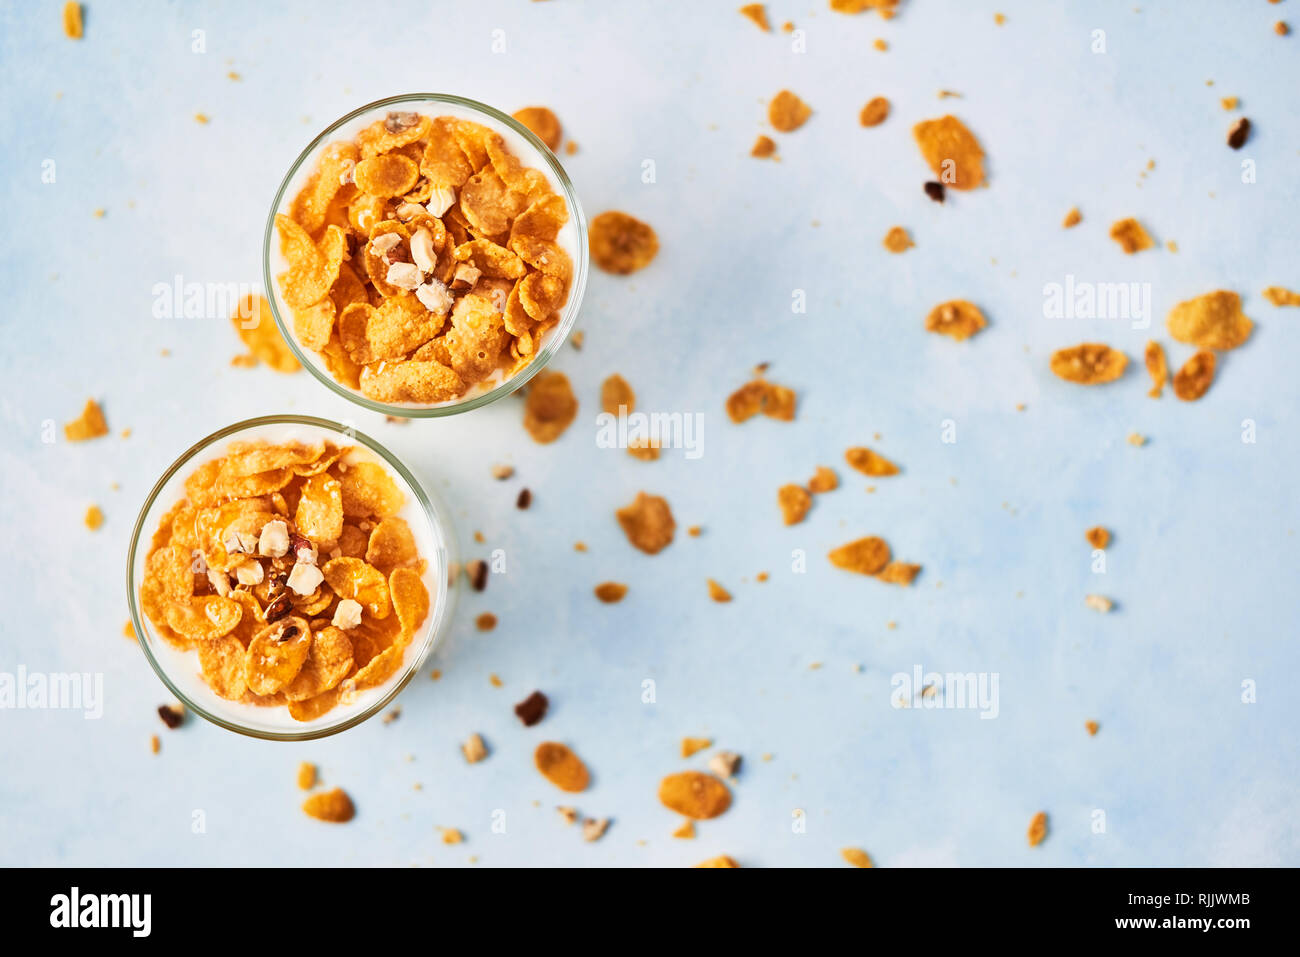 Healthy breakfast or dessert. Tasty corn flakes with yogurt, almond and honey in a small glass on light blue background. Top view. Copy space for text Stock Photo